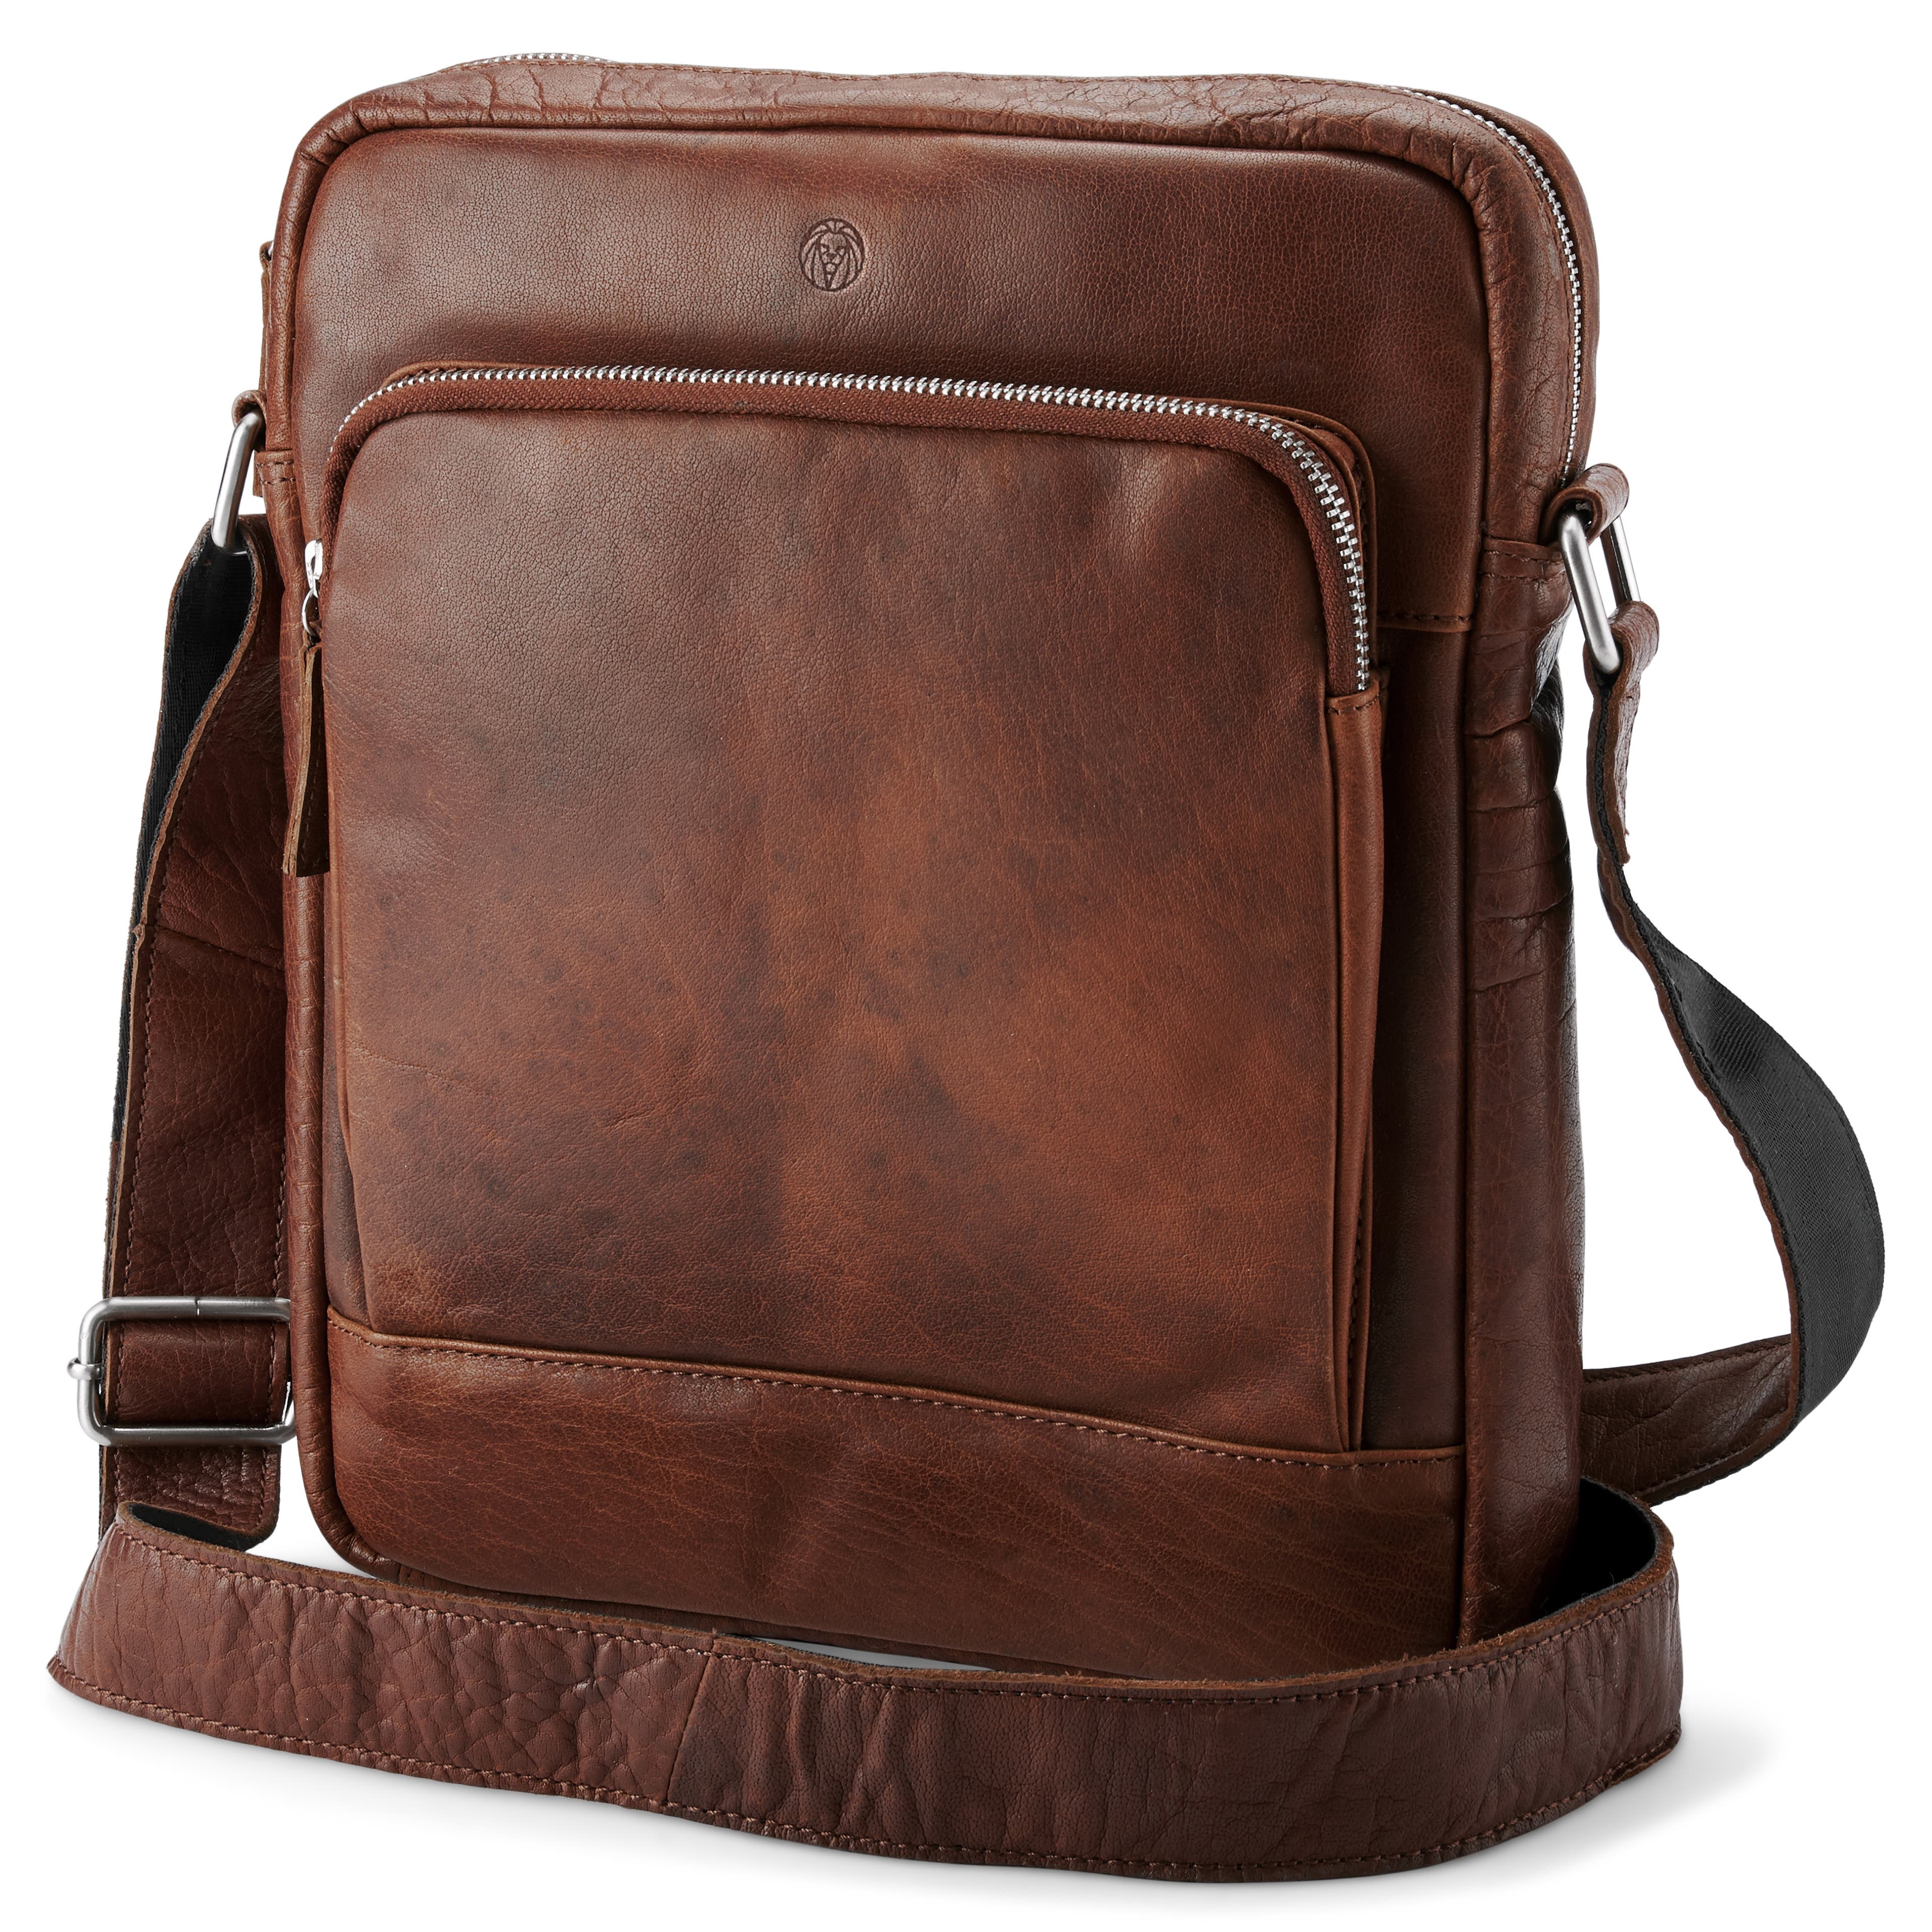 Montreal Classic Tan Leather City Bag 